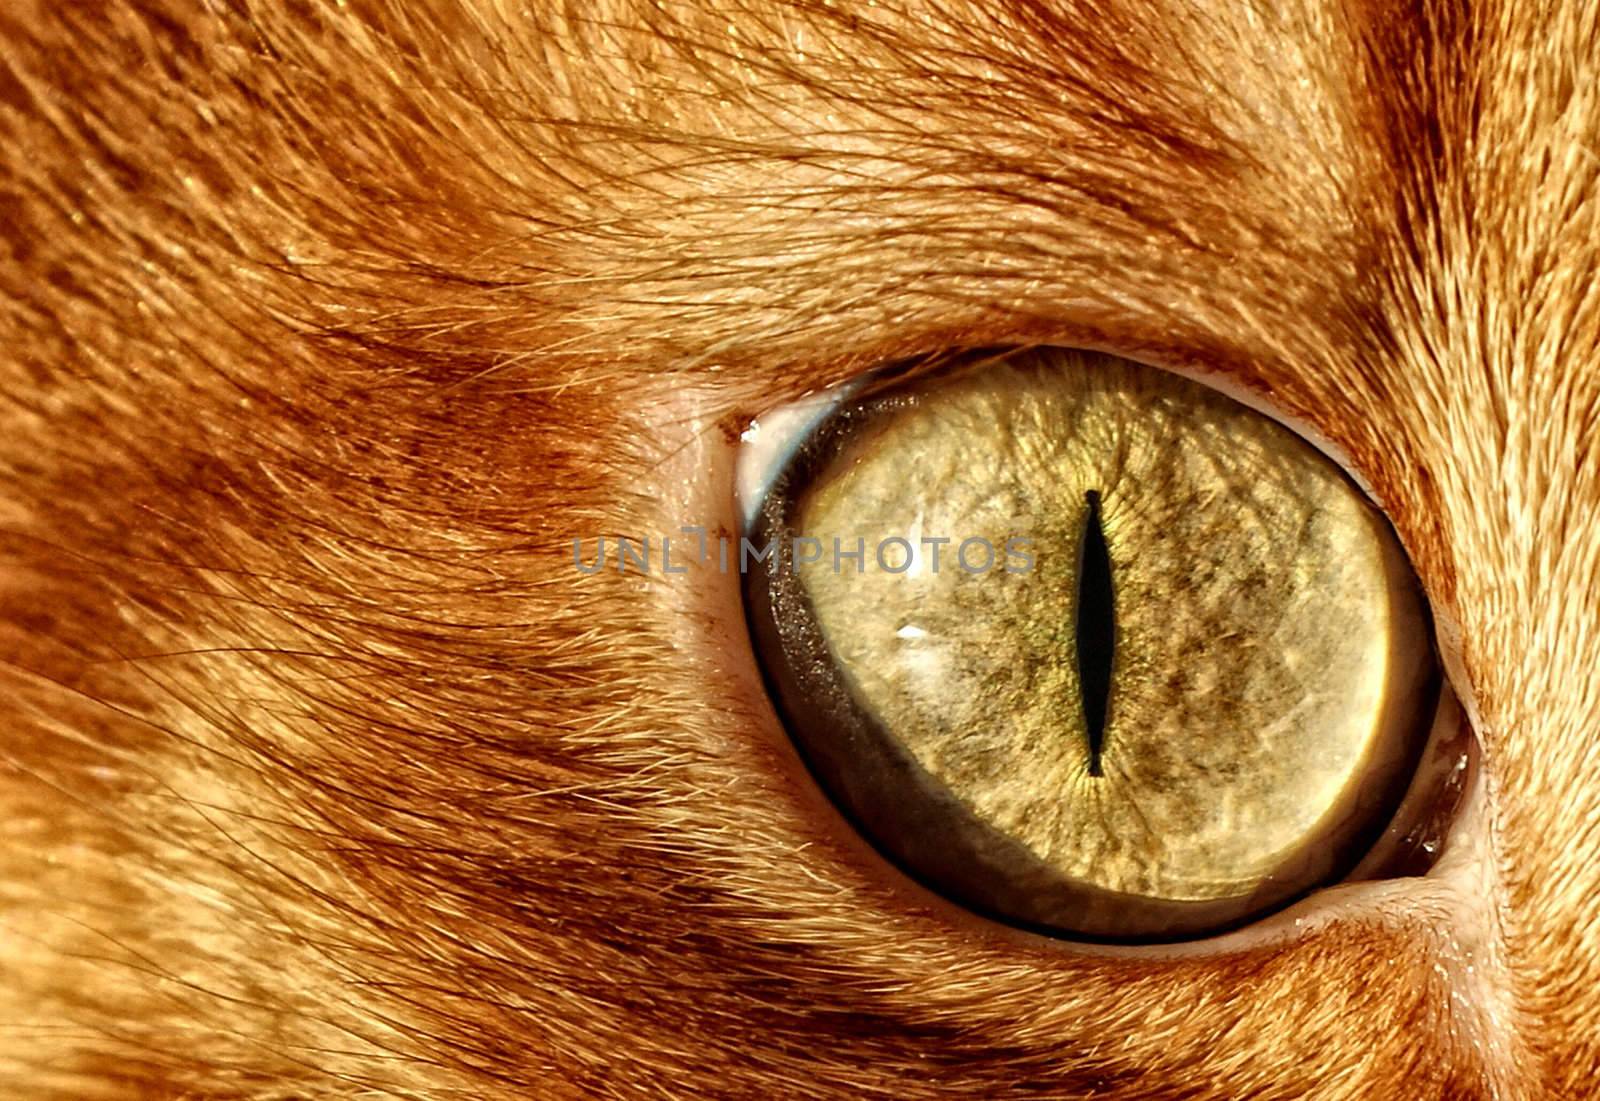 background of a high contrast shot of a cat eye